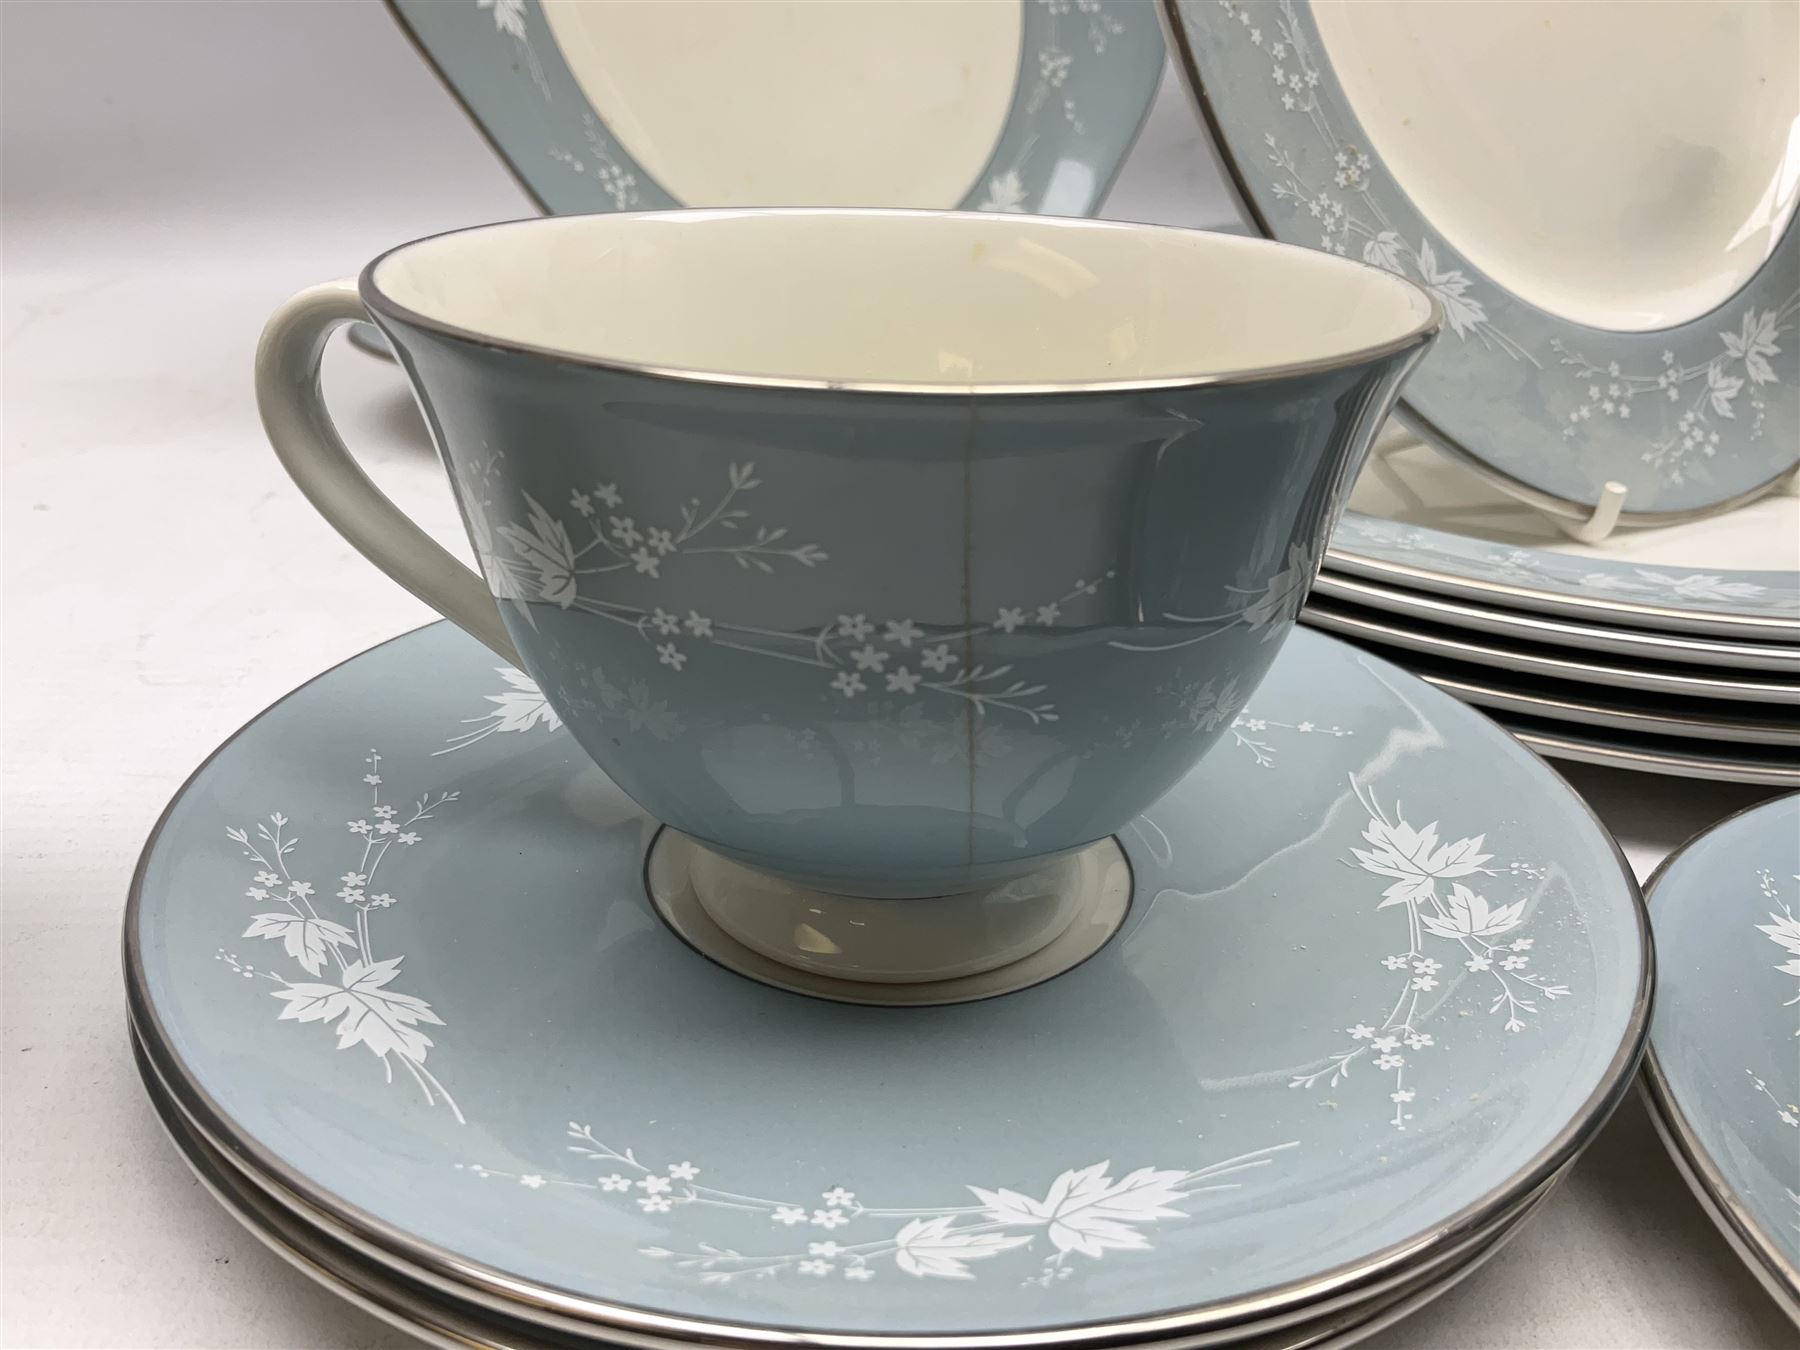 Royal Doulton Reflection pattern tea and dinner wares - Image 4 of 9